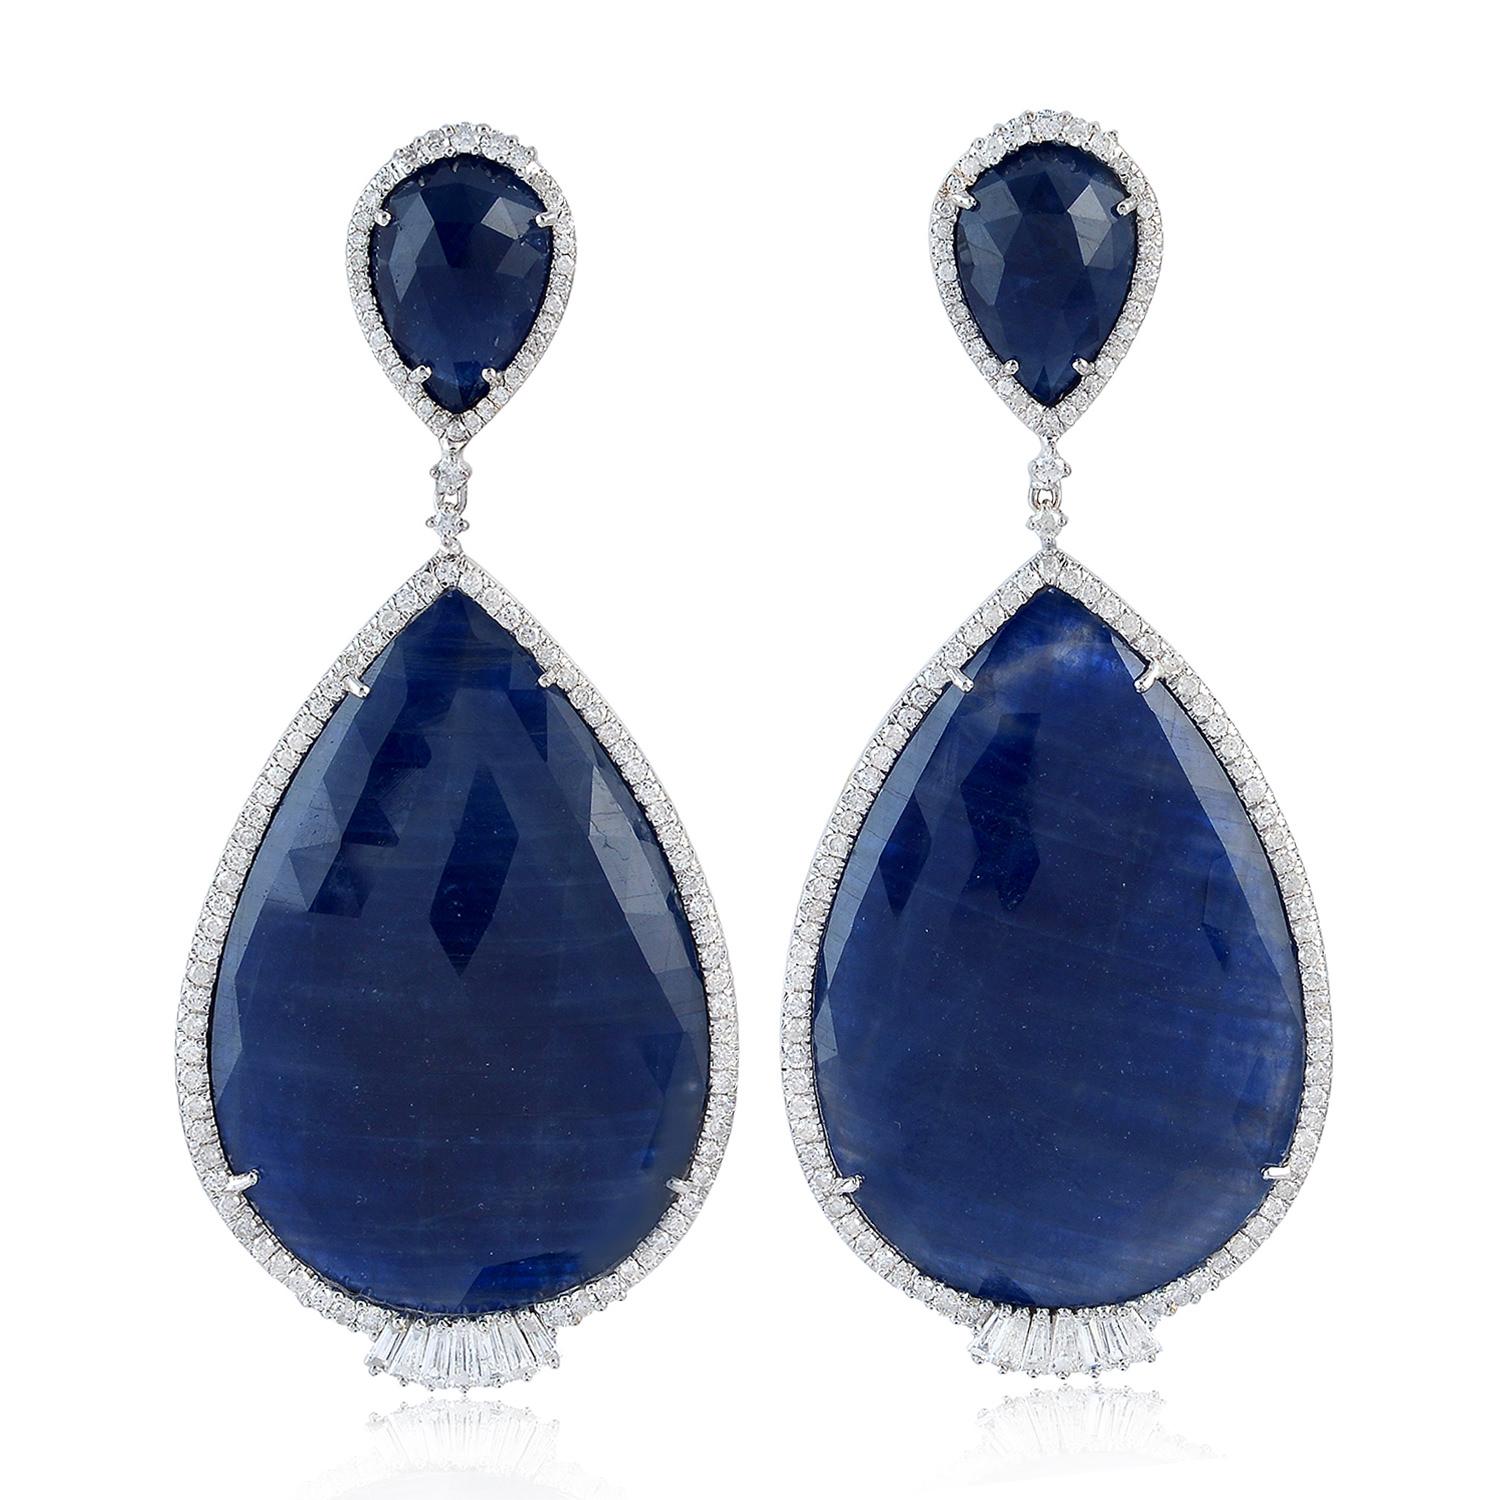 Pear Cut Pear Shaped Sliced Blue Sapphire Earring with Diamonds Made in 18k Gold For Sale